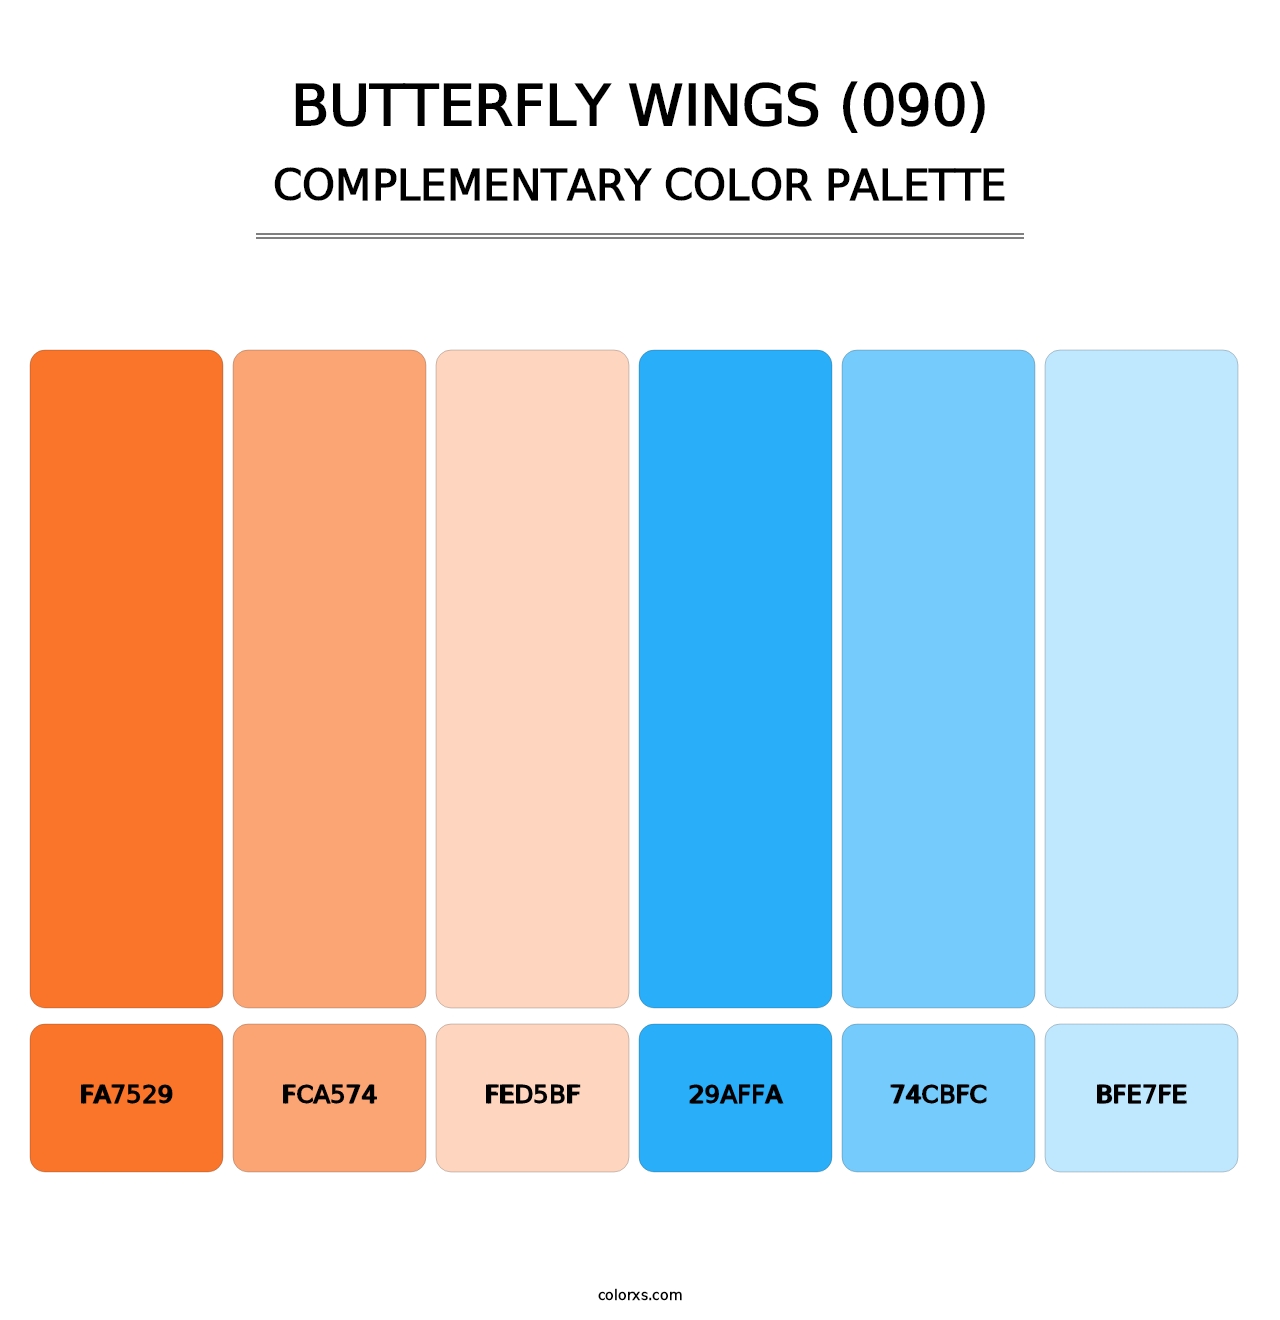 Butterfly Wings (090) - Complementary Color Palette